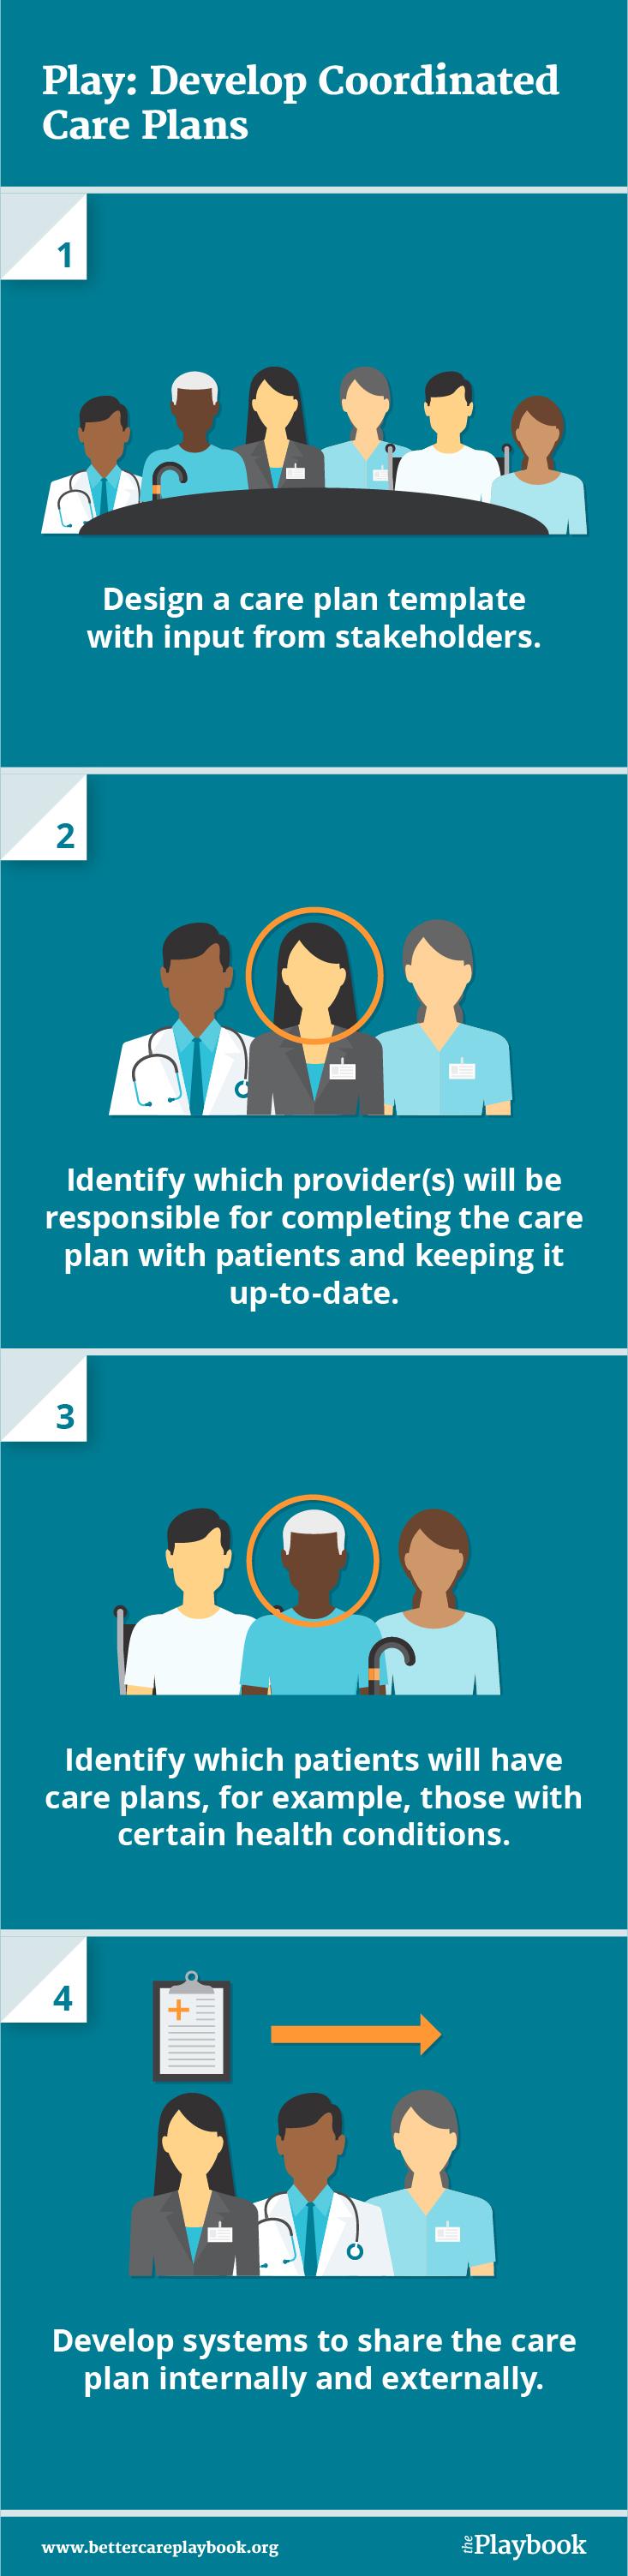 Play: Develop Coordinated Care Plans